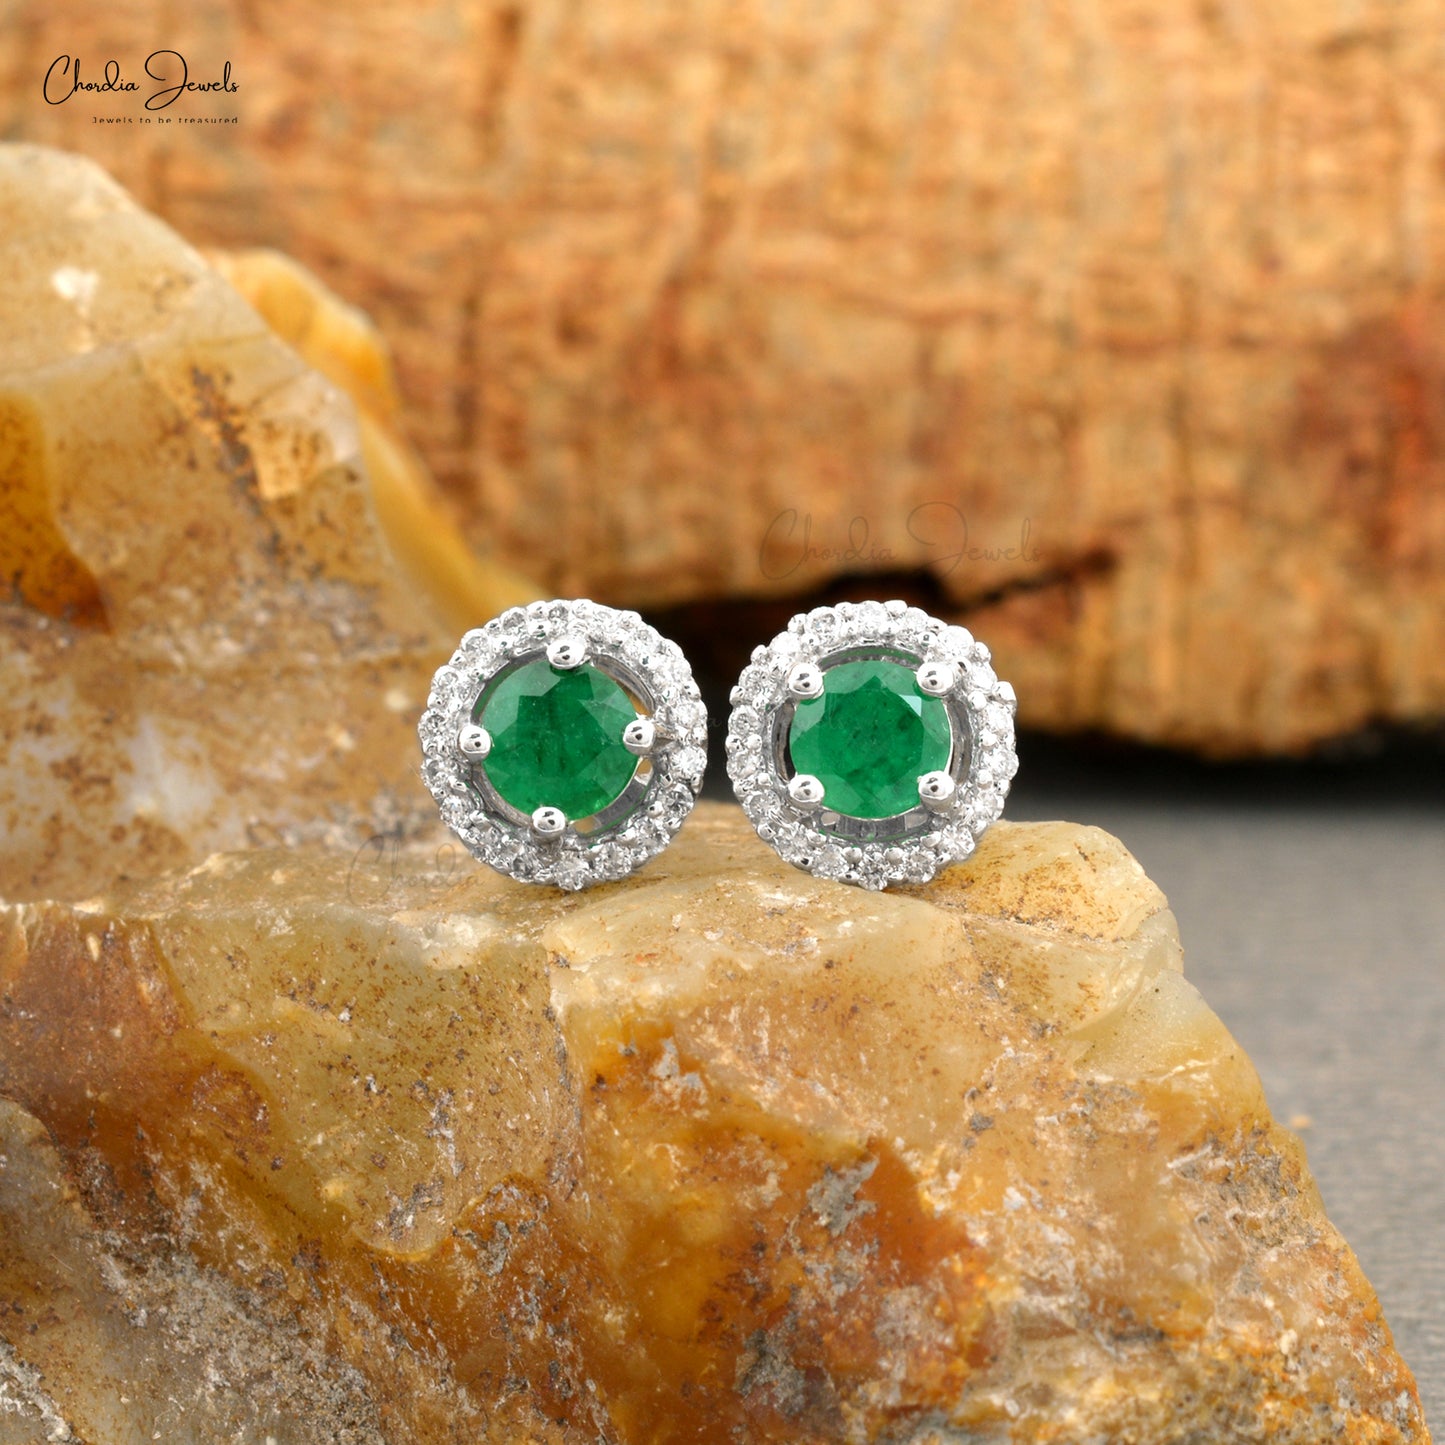 Step into world of elegance with these real emerald earrings.